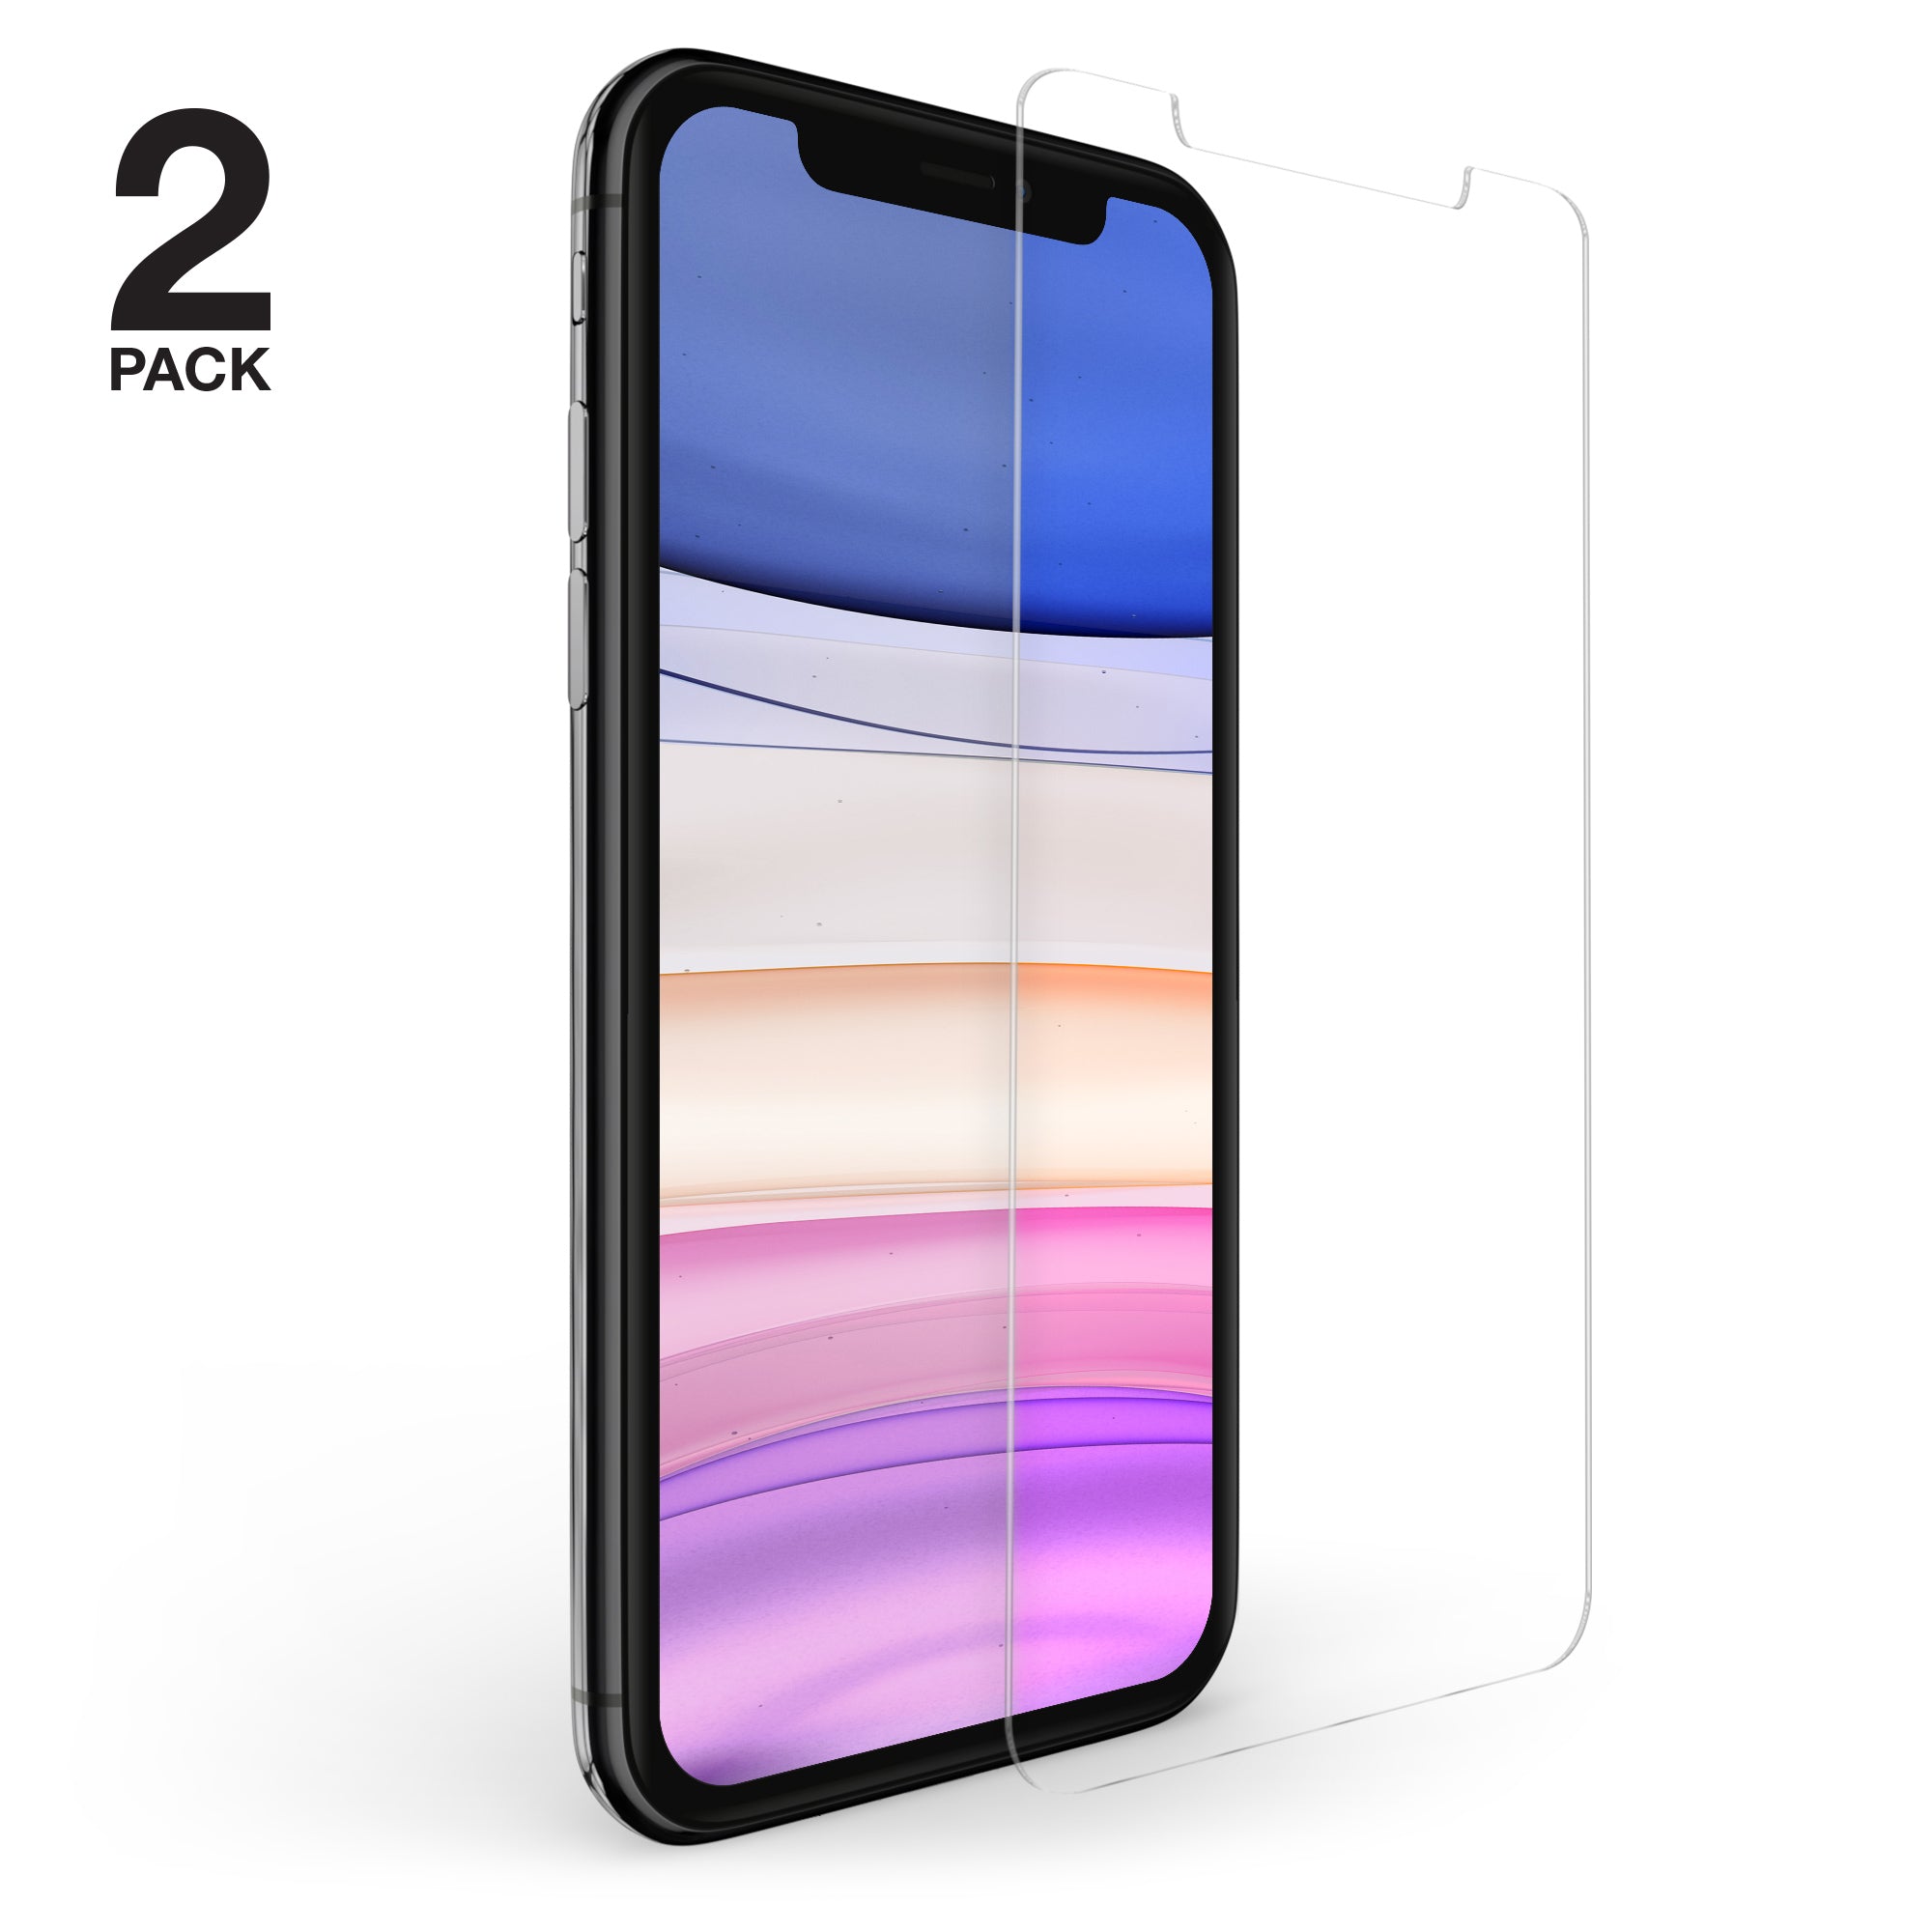 Screen protectors and cases, iPhone 11